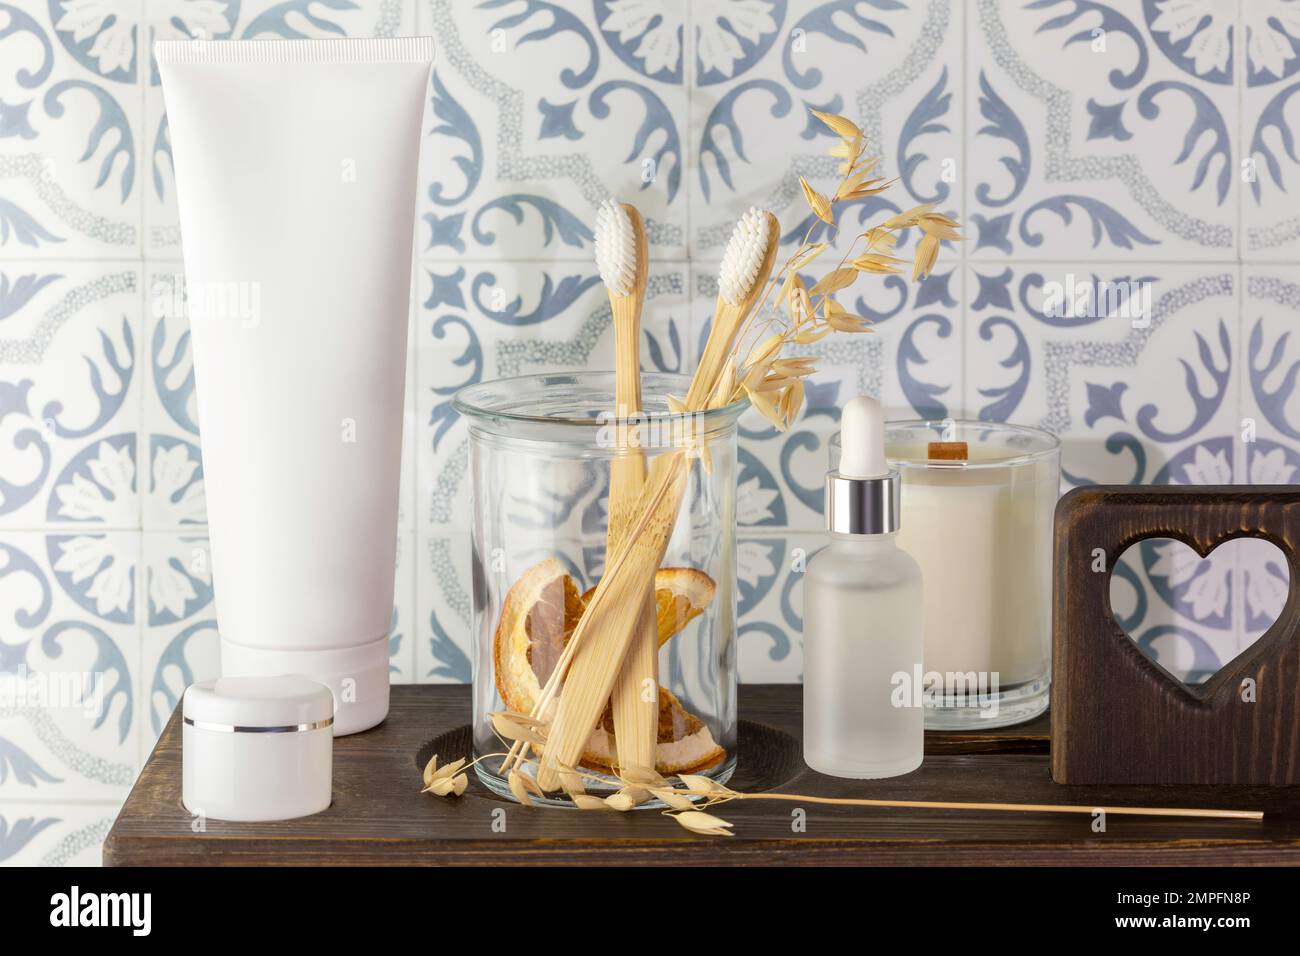 Eco friendly bath still life with bio toothpaste, wooden toothbrushes in a glass jar, organic serum and beauty products on a wooden shelf in bathroom. Stock Photo